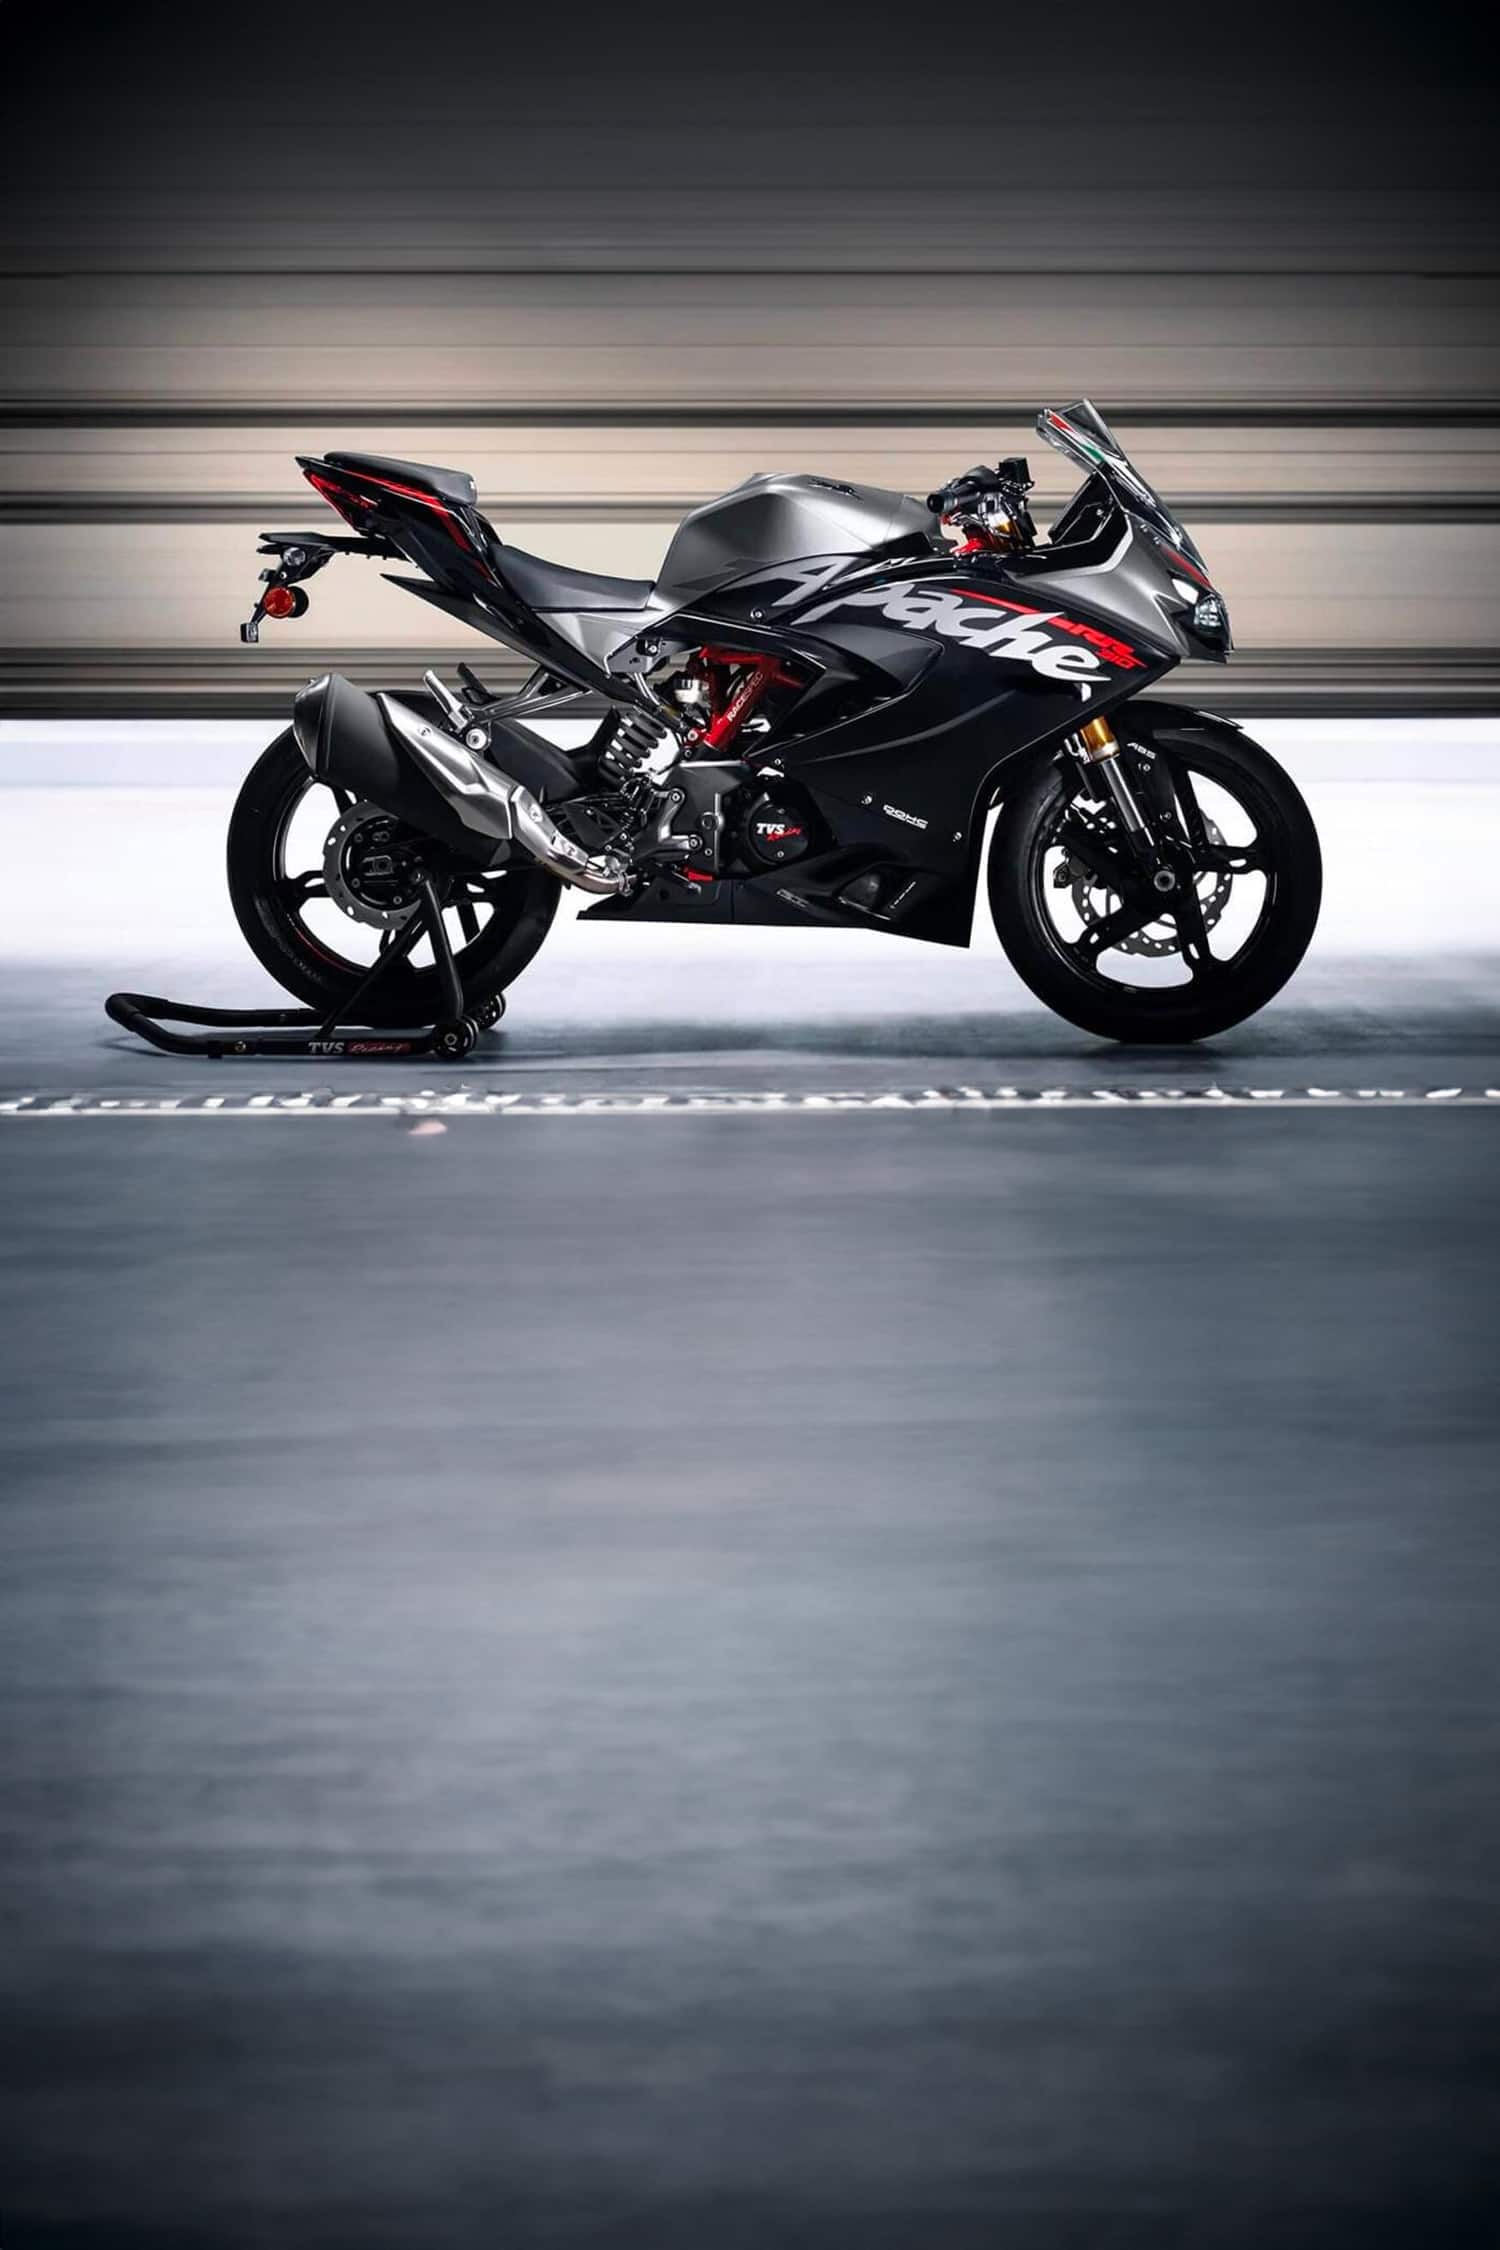 Explore The AllNew TVS Apache RR 310 In Our Image Gallery